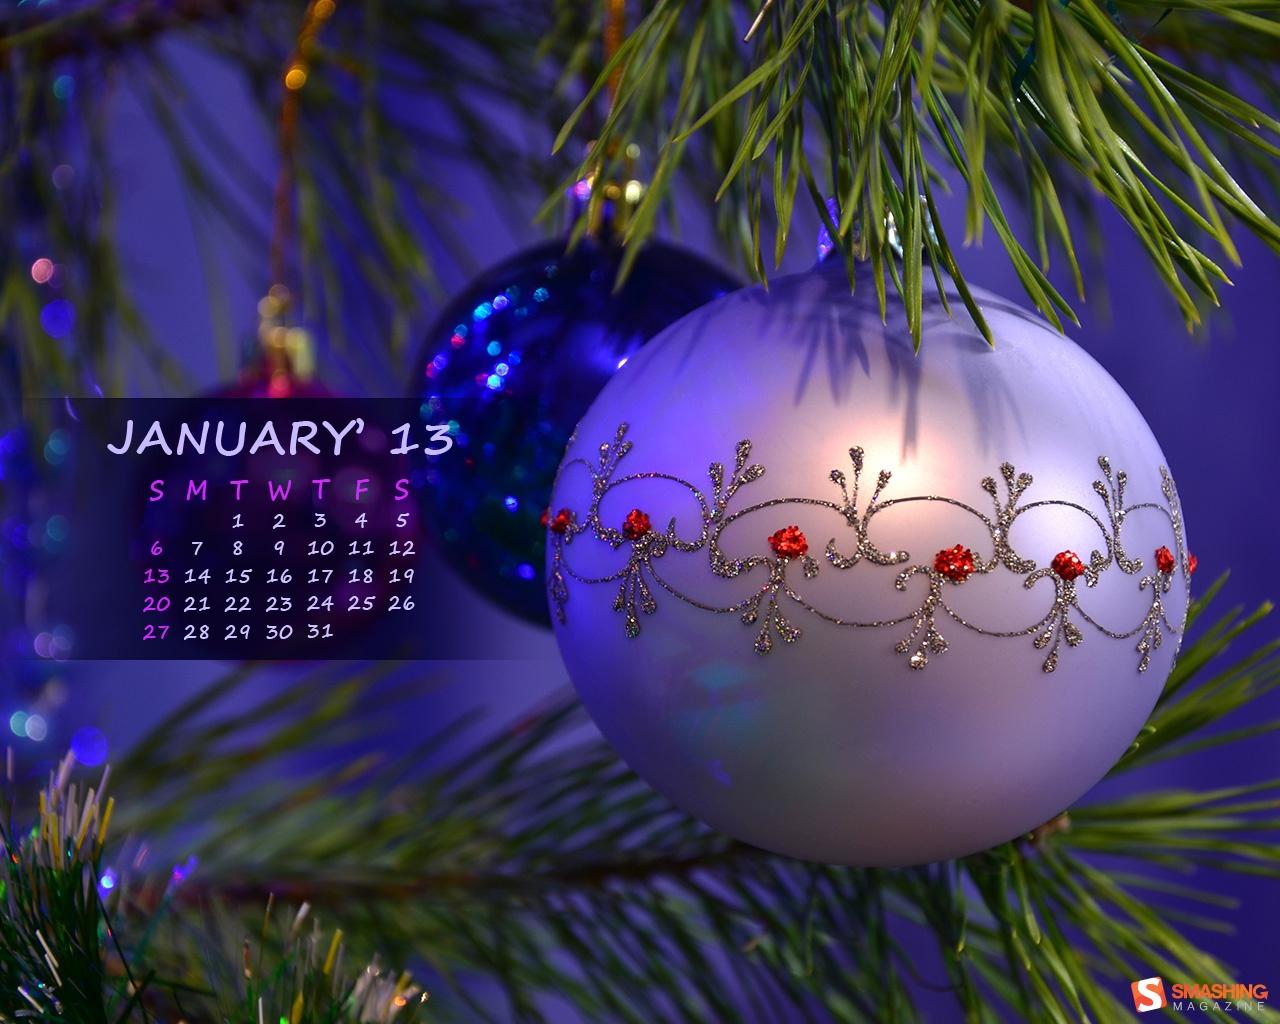 ... : Welcome 2013 ! Free January Wallpaper Calendars to Celebrate